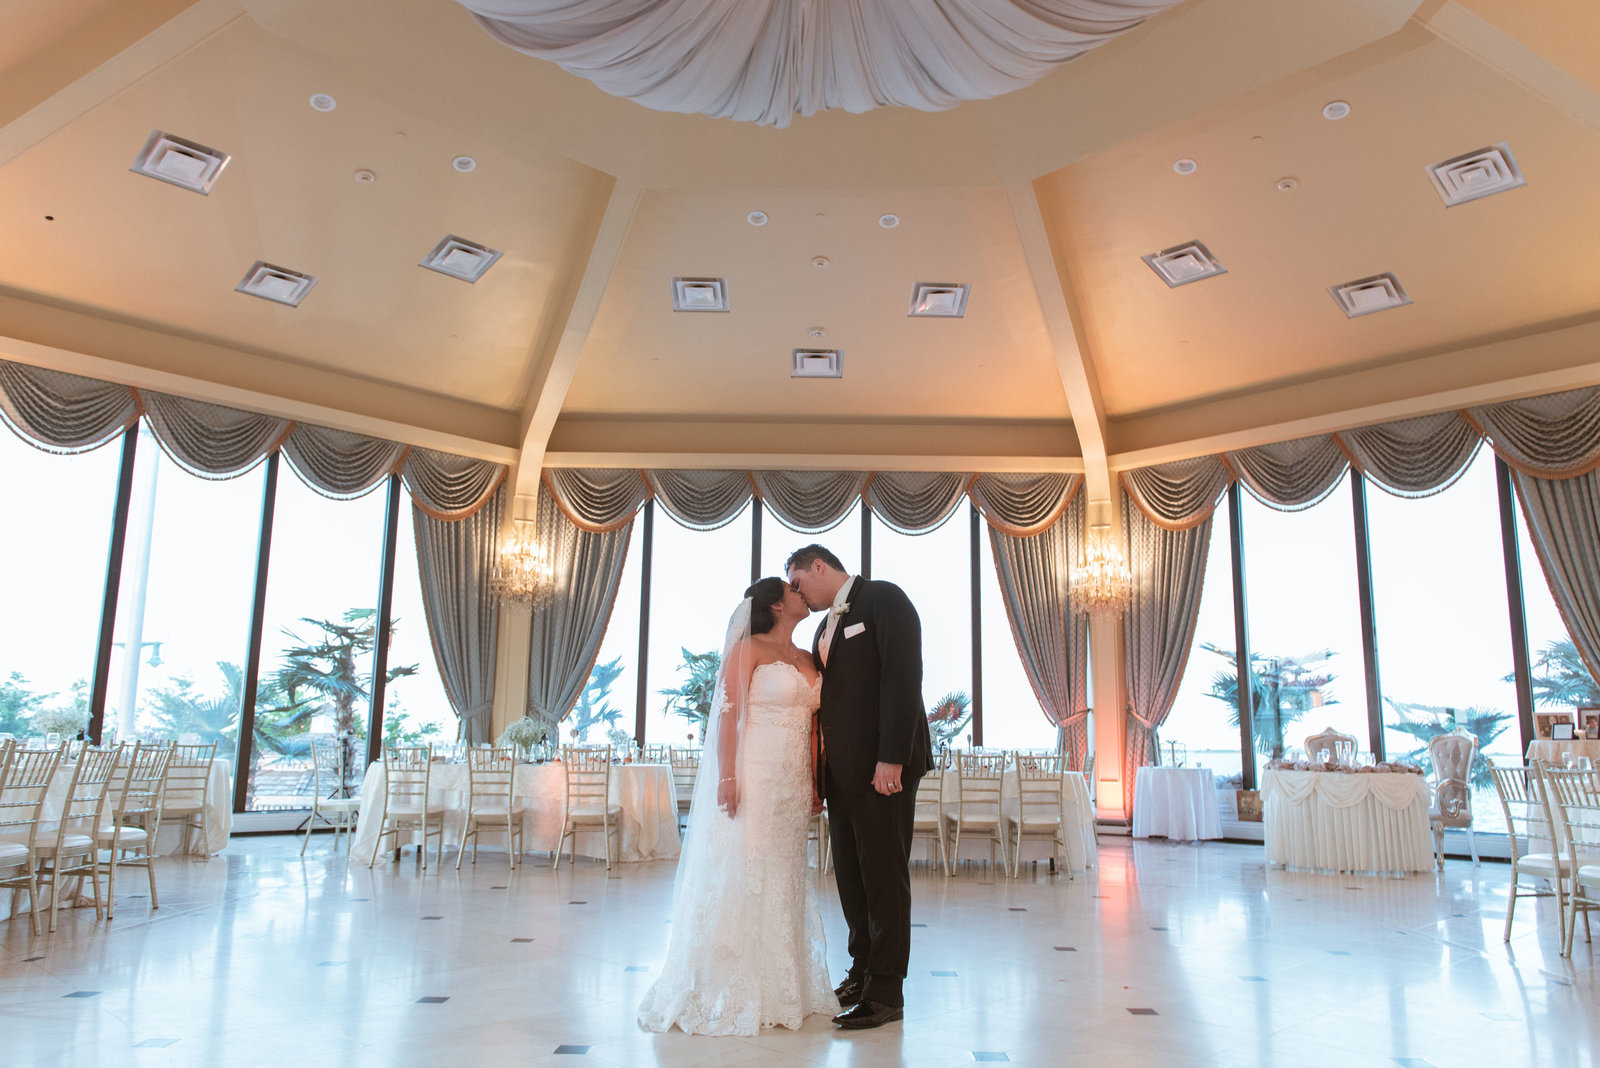 Bride and groom in the ballroom at Chateau La Mer